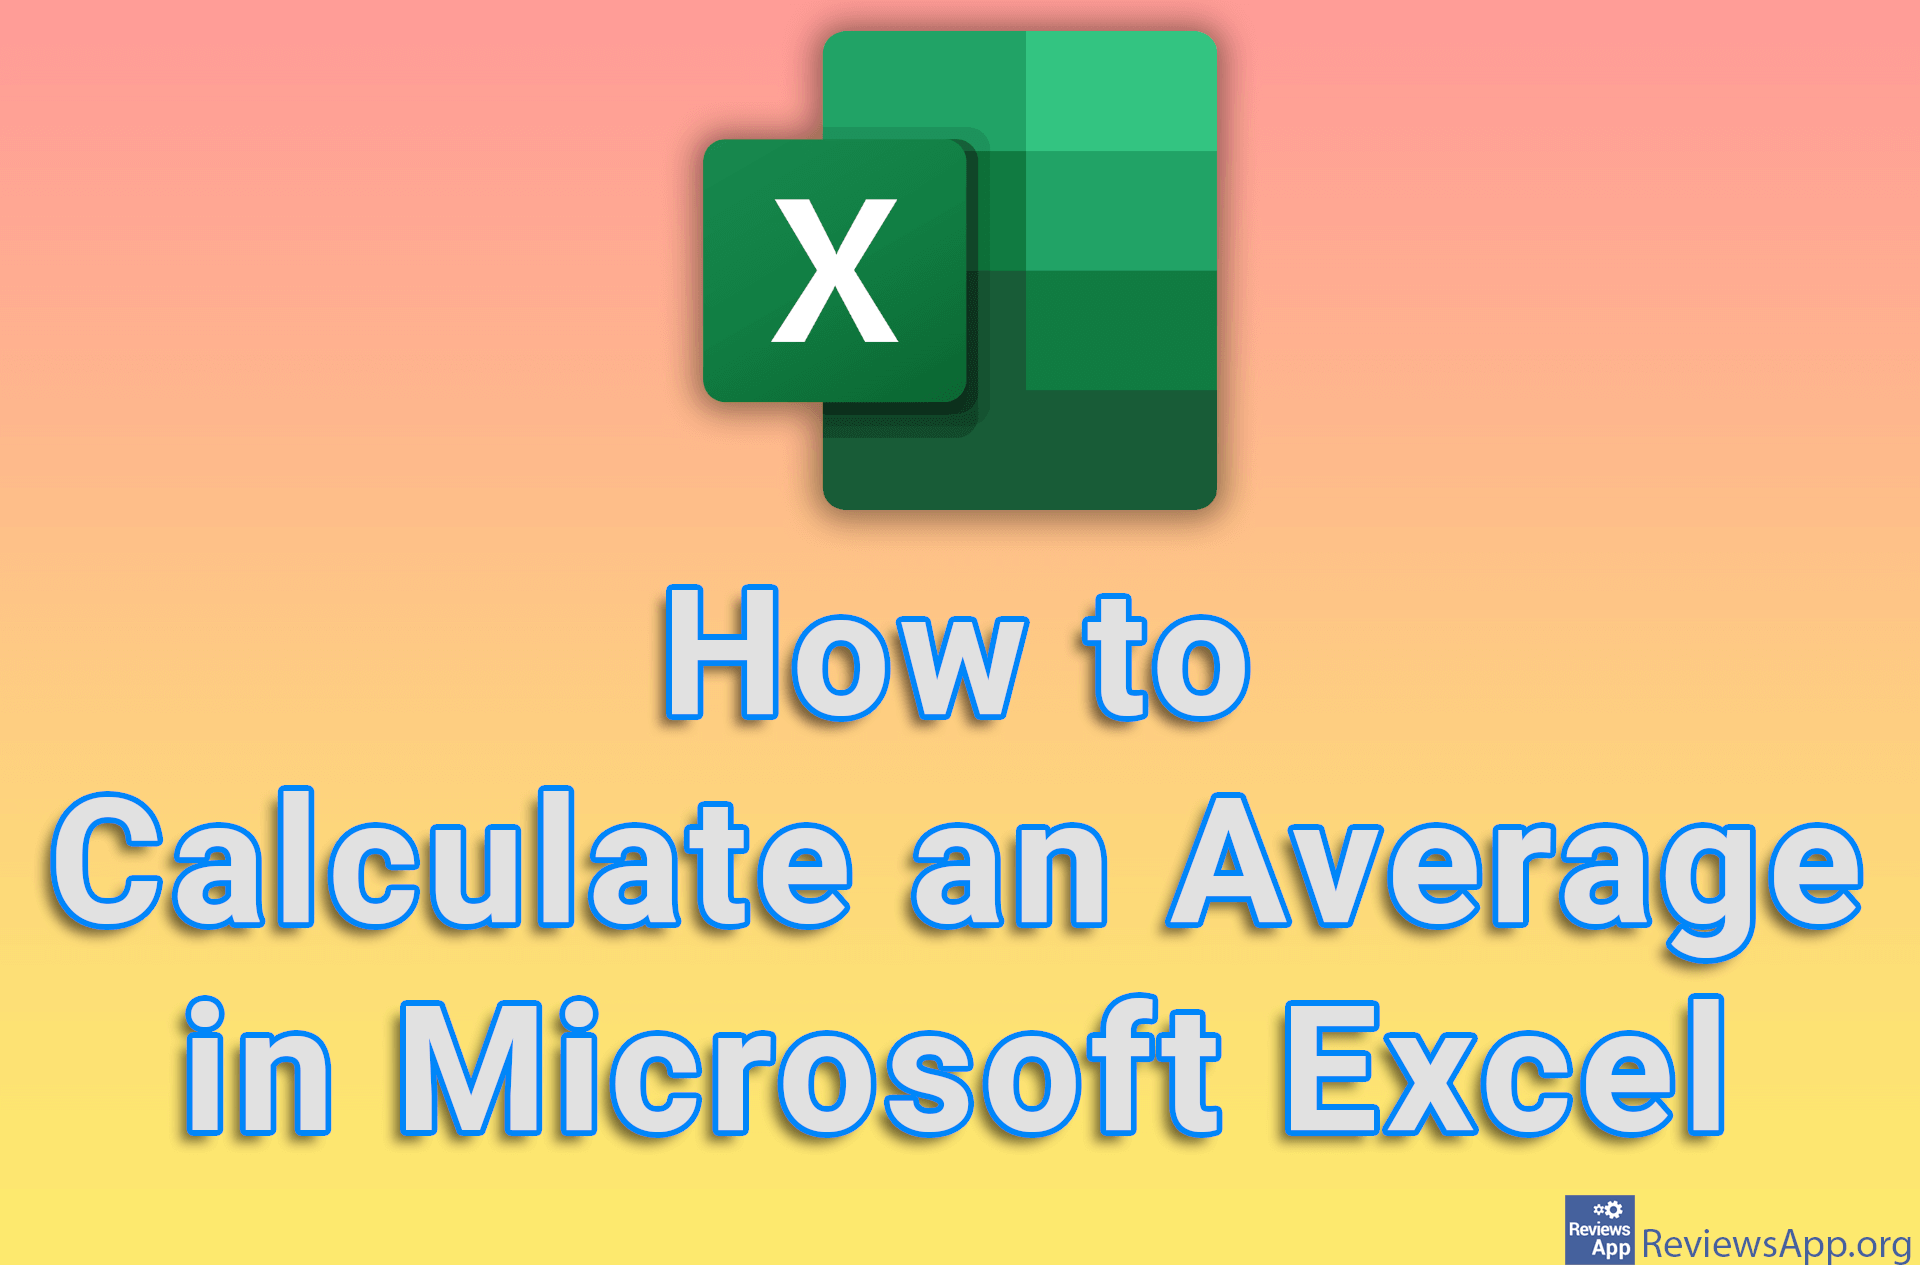 How to Calculate an Average in Microsoft Excel